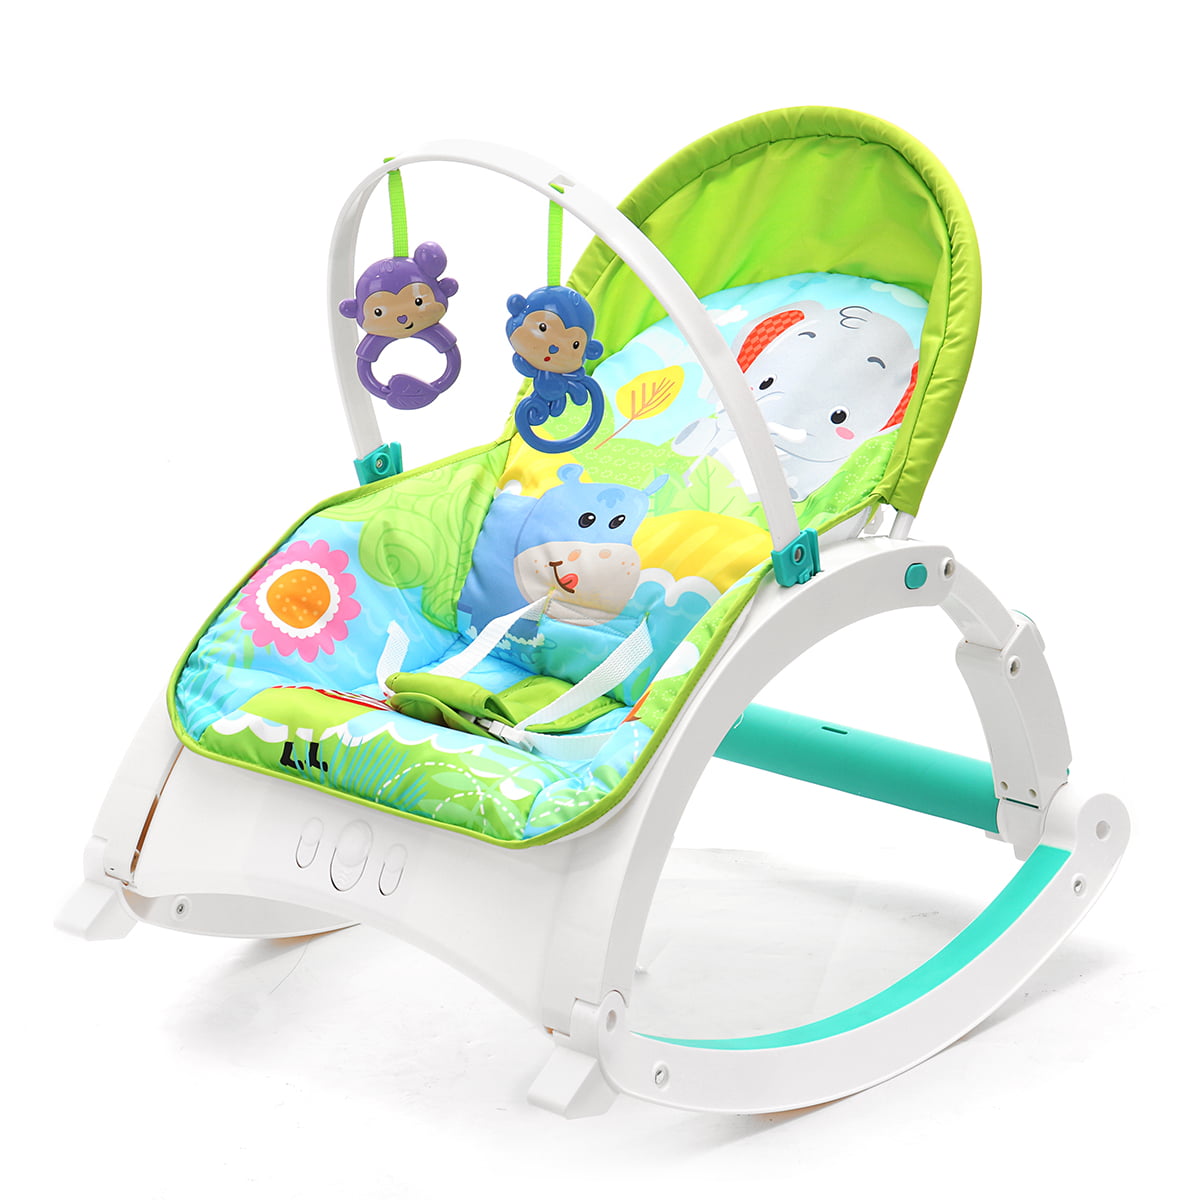 Infant-to-Toddler Rocker Portable Electric Baby Swing Cradle Multicolour Baby Rocking Chair Seat with Music Baby Swing Bouncer 